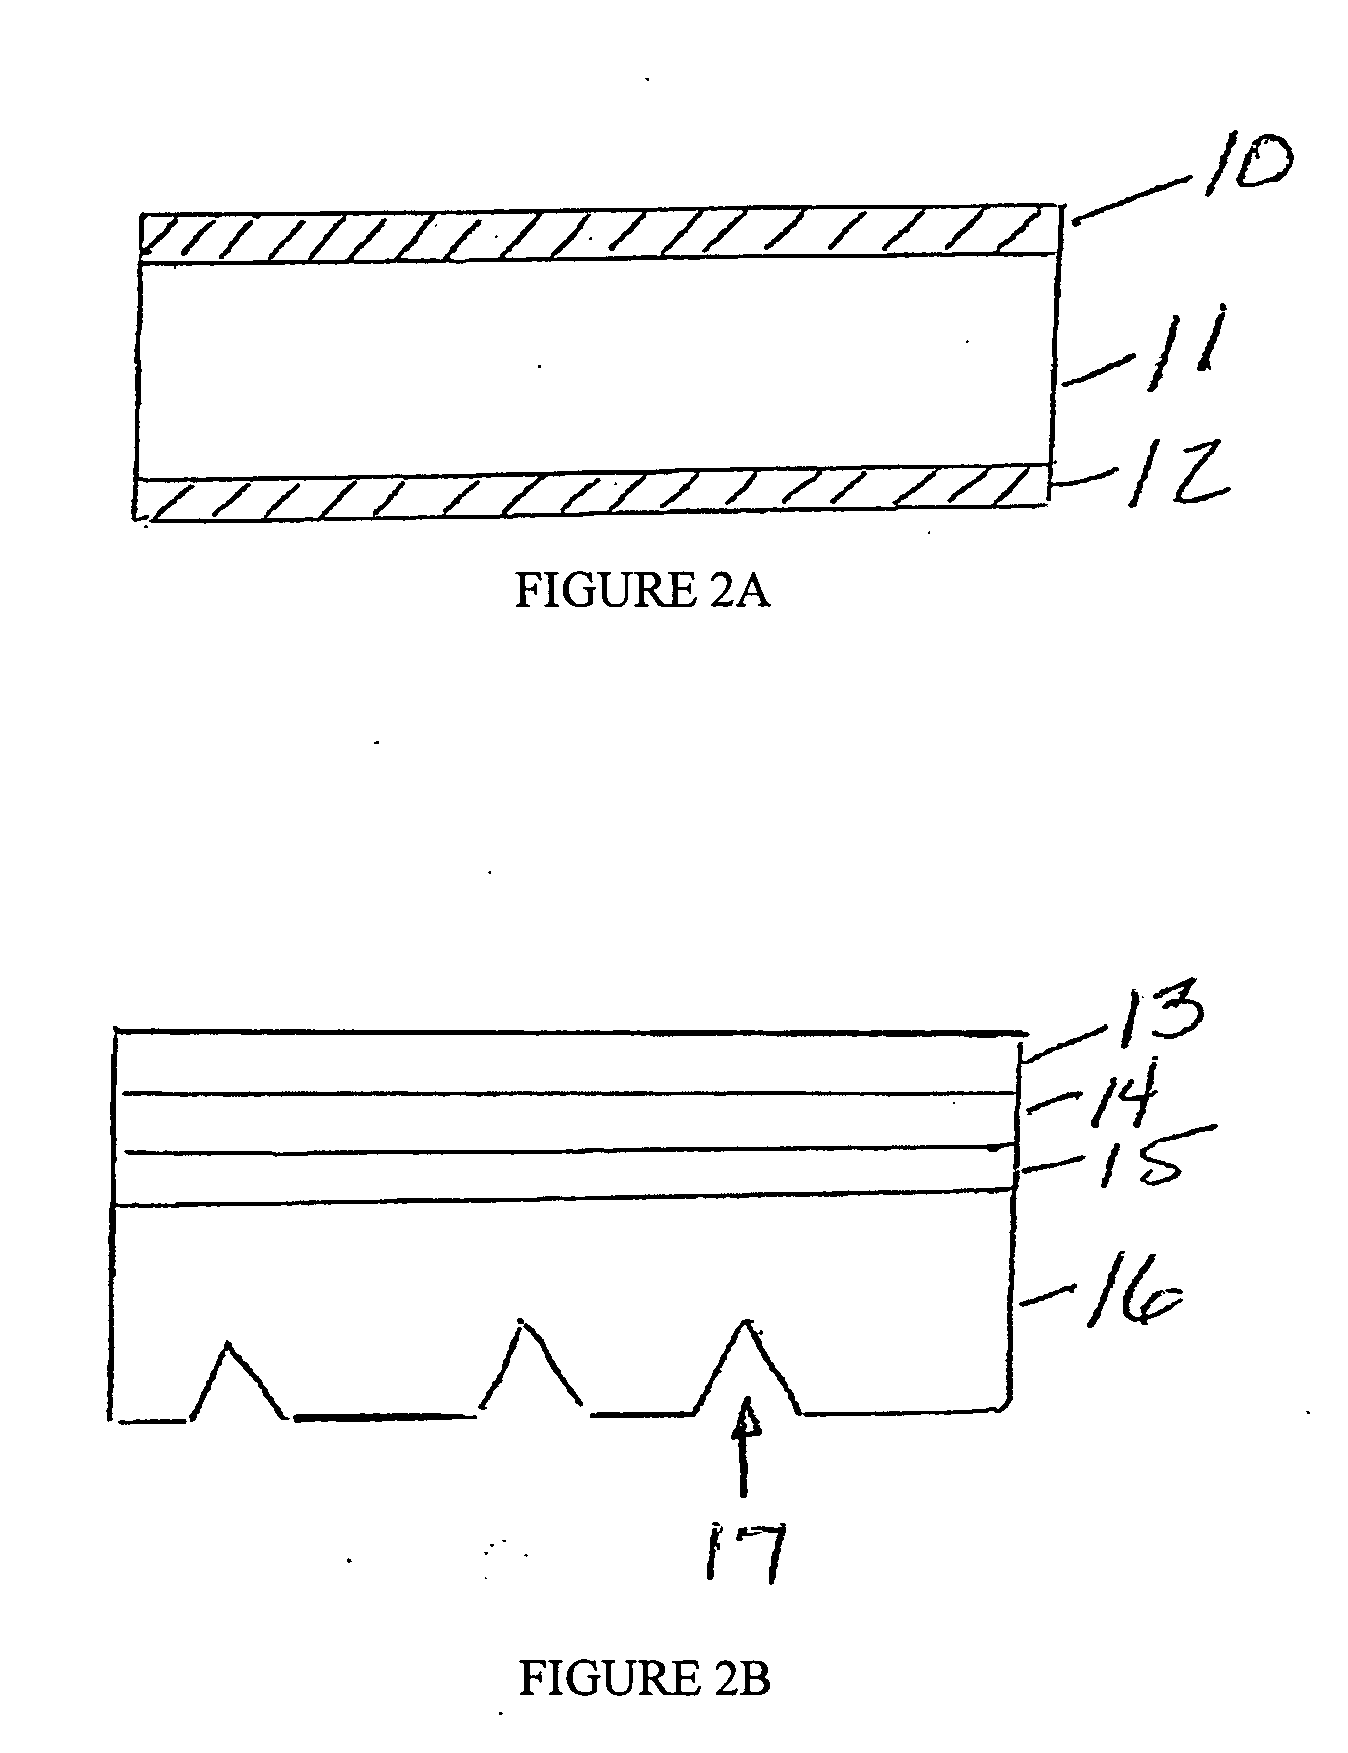 Dual sided processing and devices based on freestanding nitride and zinc oxide films